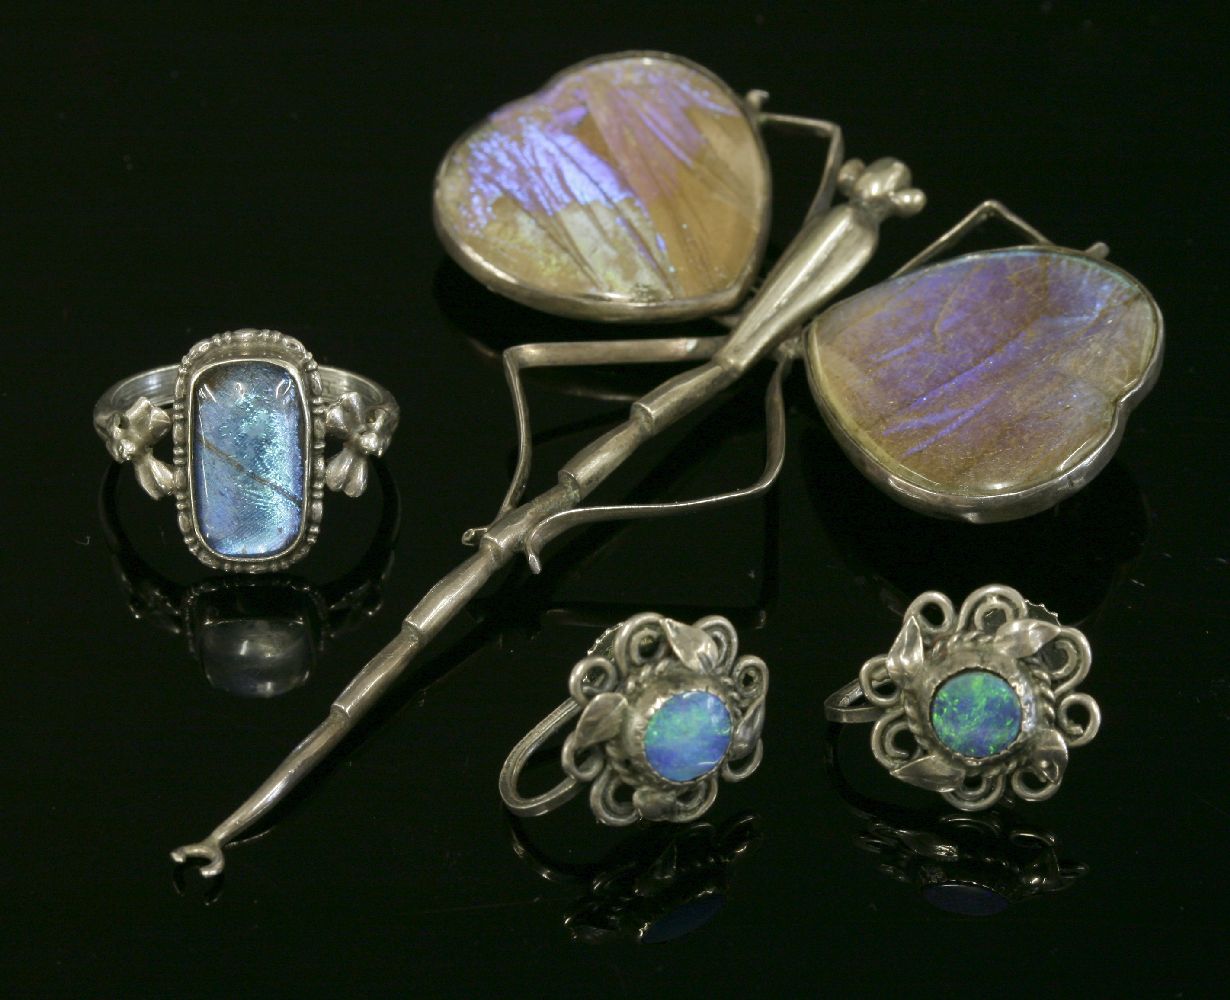 A pair of Arts and Crafts black opal doublet earrings,each one with a circular black opal doublet